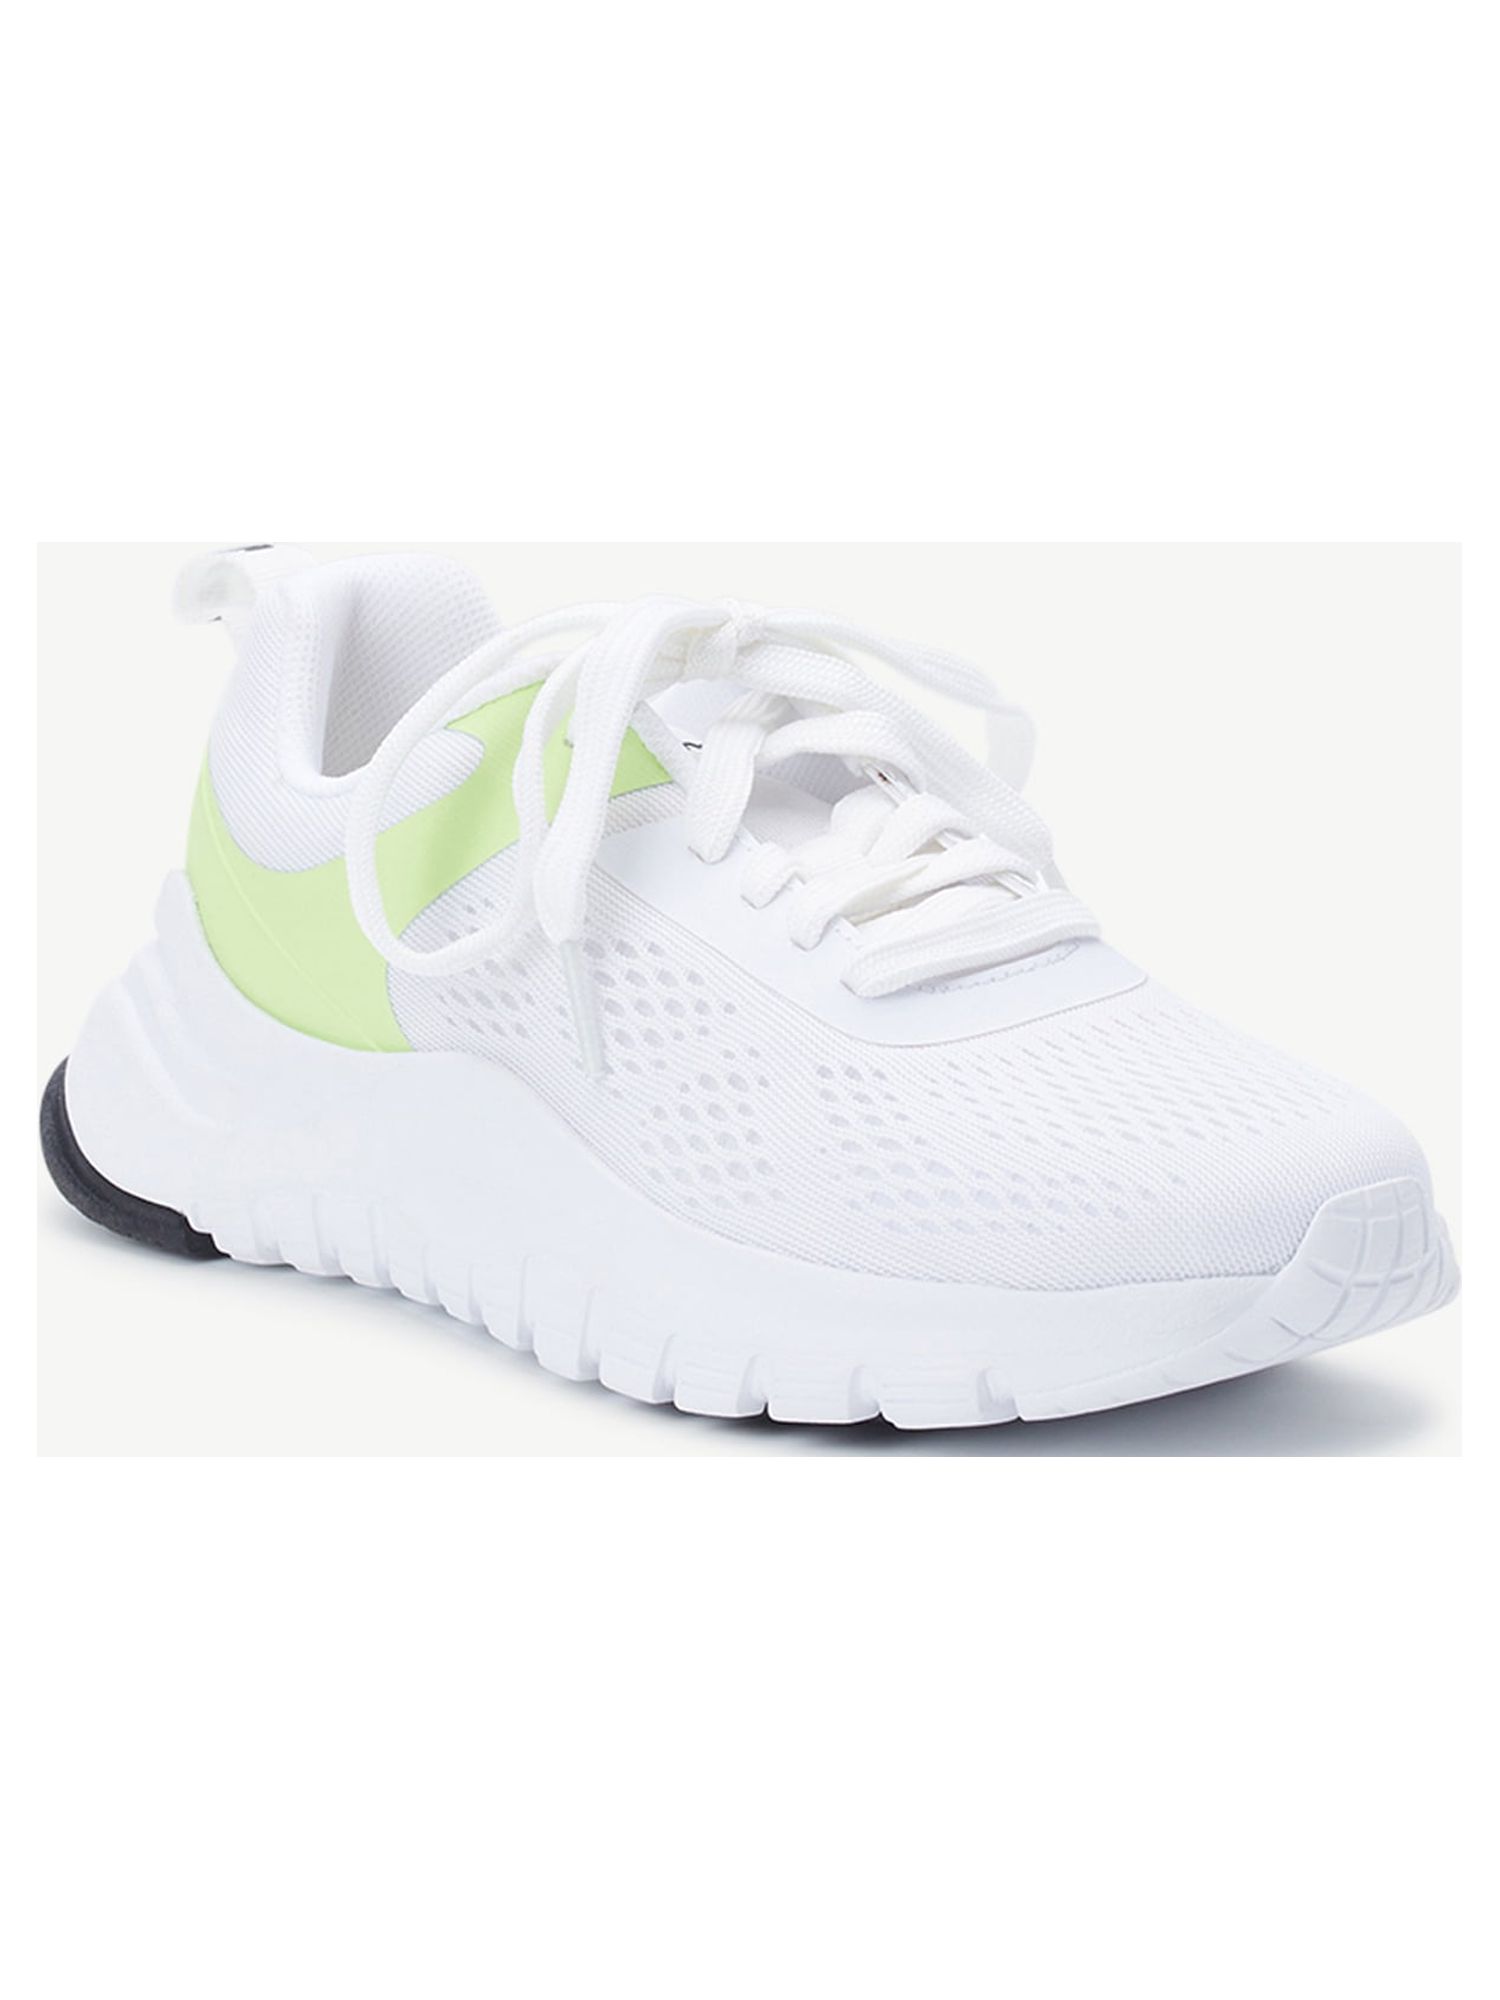 Love & Sports Women's Lace-Up Mesh Athletic Sneakers - image 1 of 8